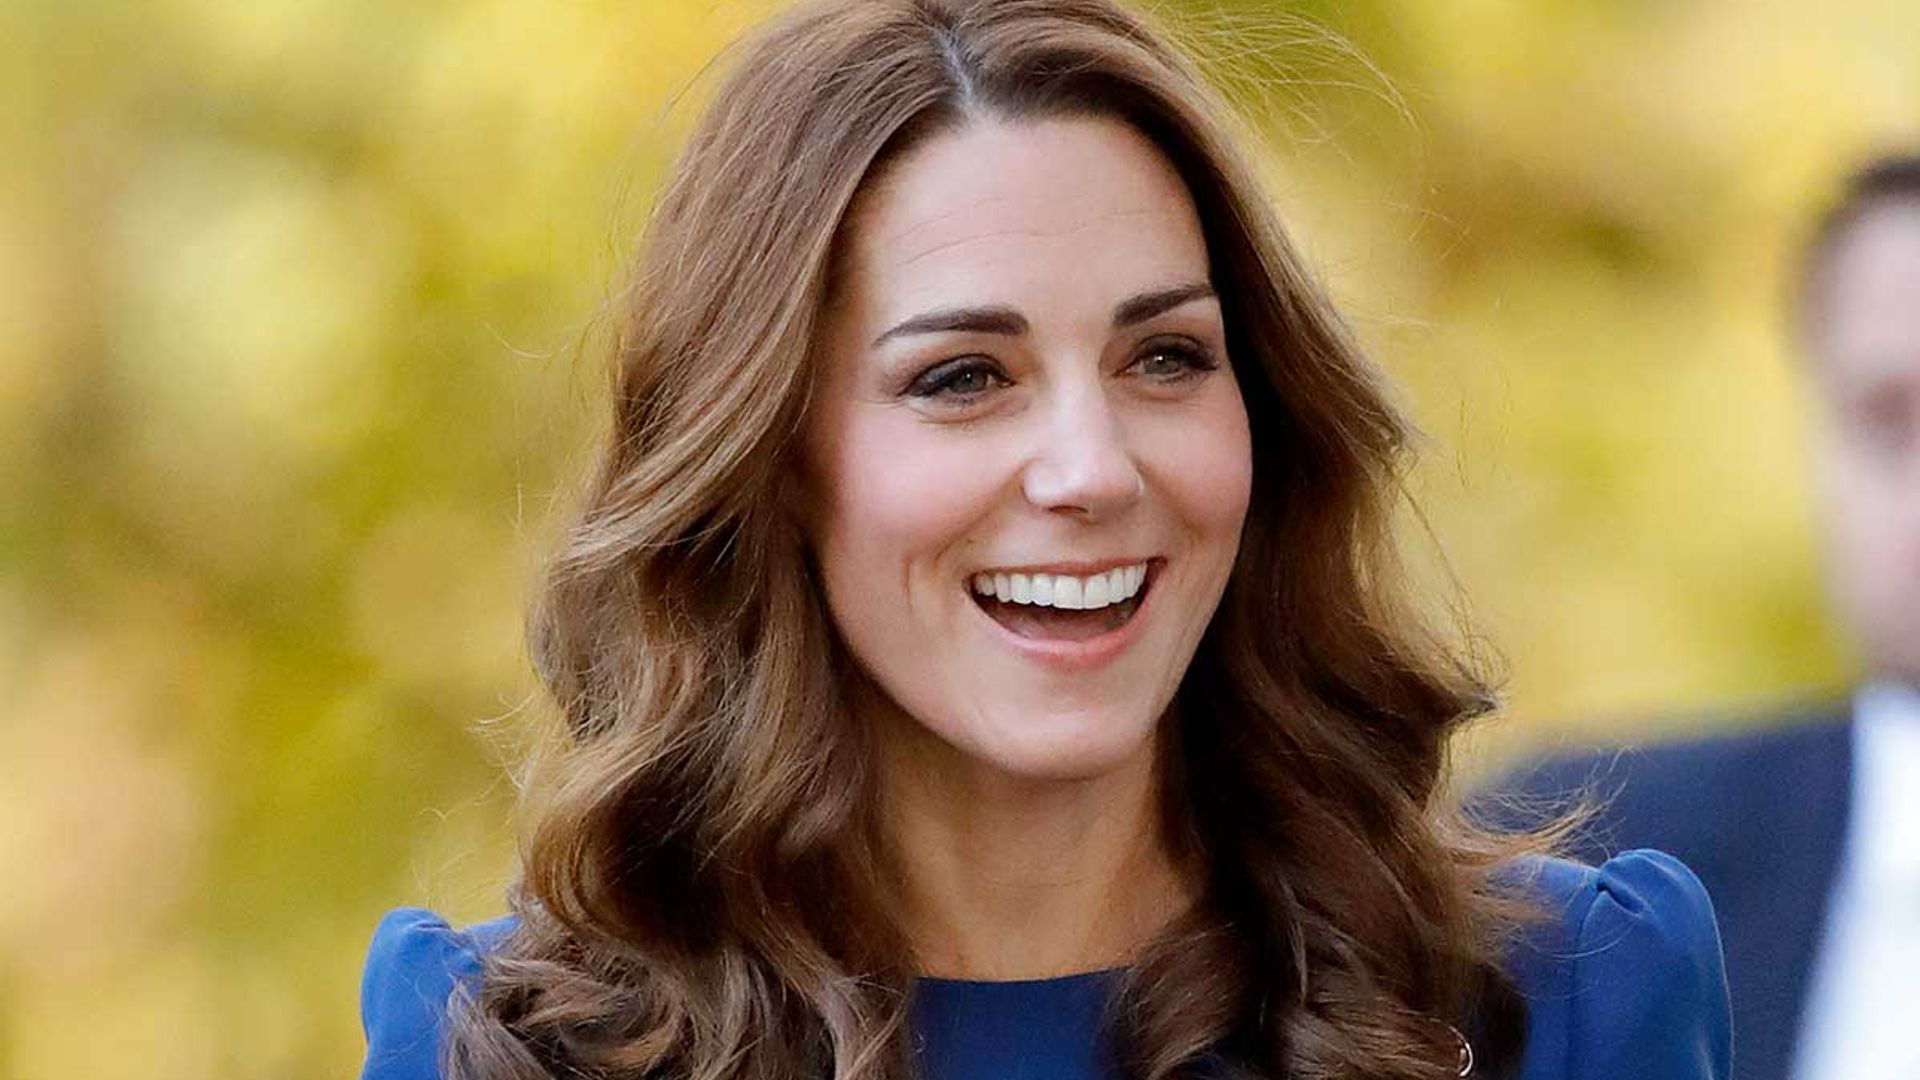 Kate Middleton’s special partywear dress given must-see makeover – and wow